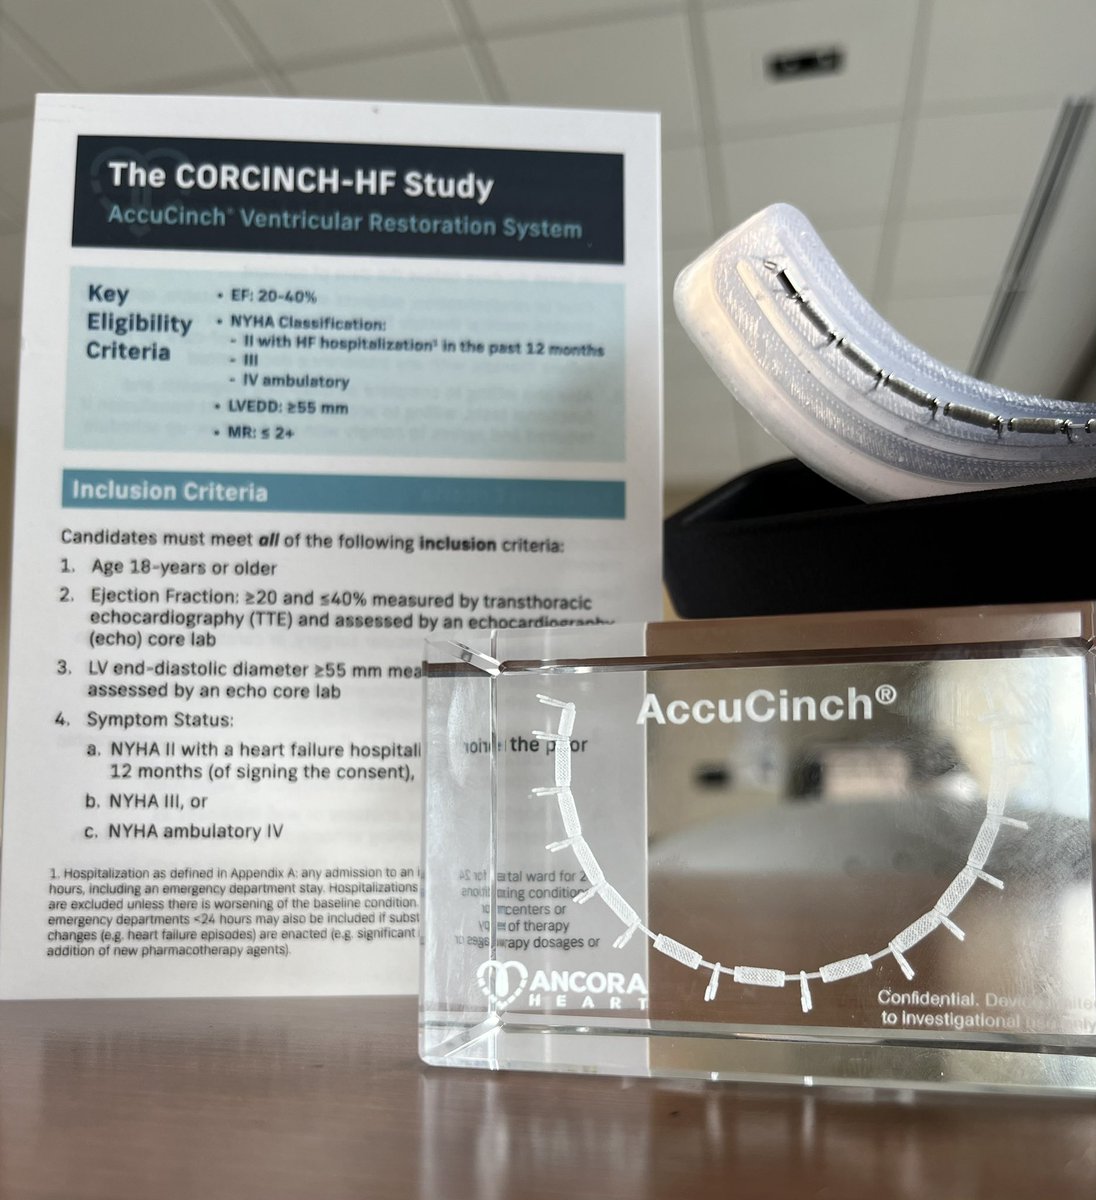 Exciting times in the #Structural & #Interventional world. New device under investigation that improves structural integrity in patients with CHFrEF by #AncoraHeart #AccuCinch